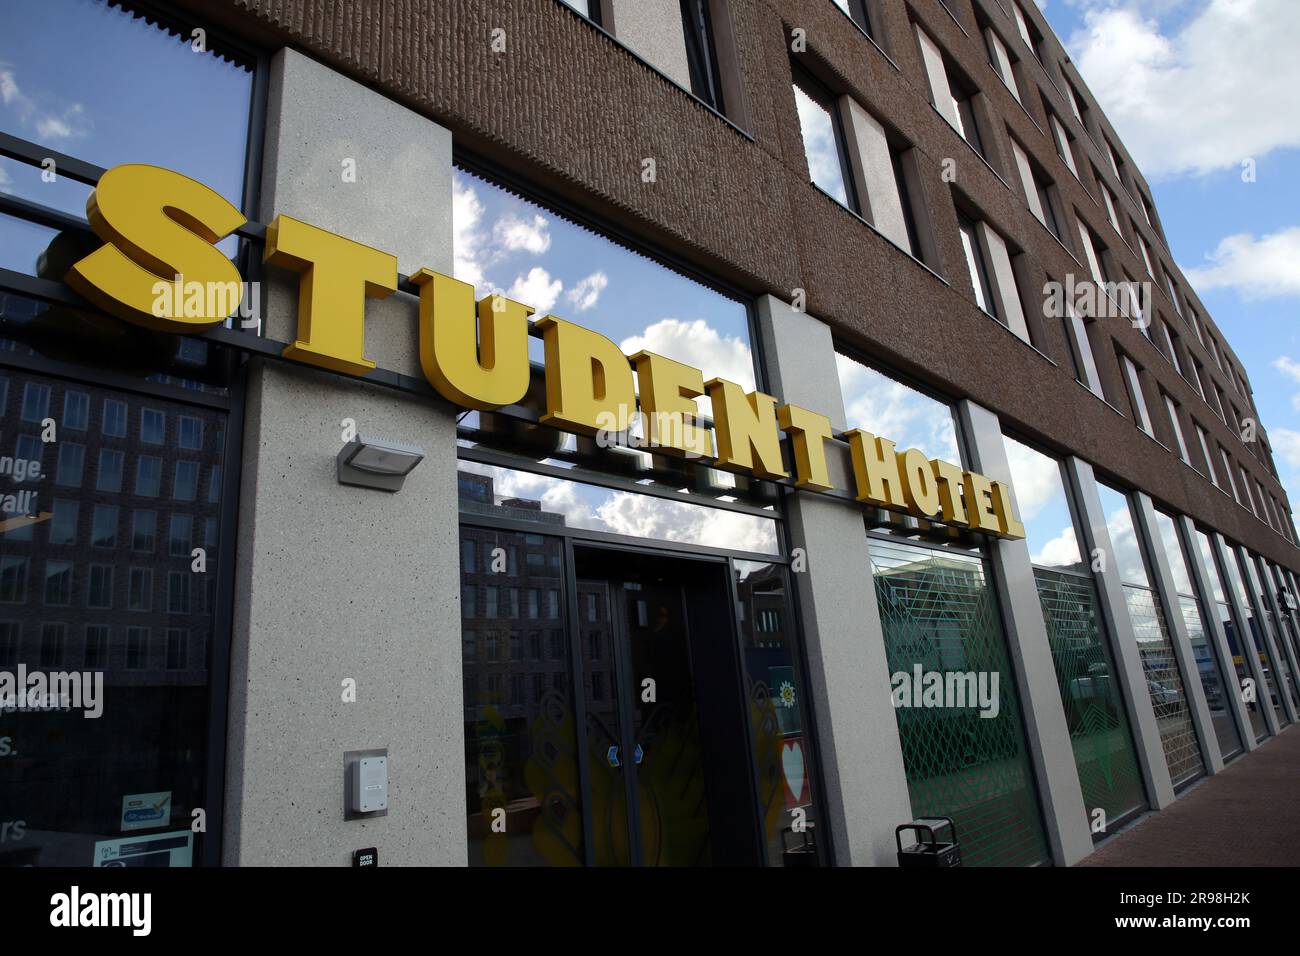 Delft, The Netherlands - Octorber 5, 2021: The facade and the signage of Student Hotel, one of the most well-known hotels in delft city of Holland. Stock Photo